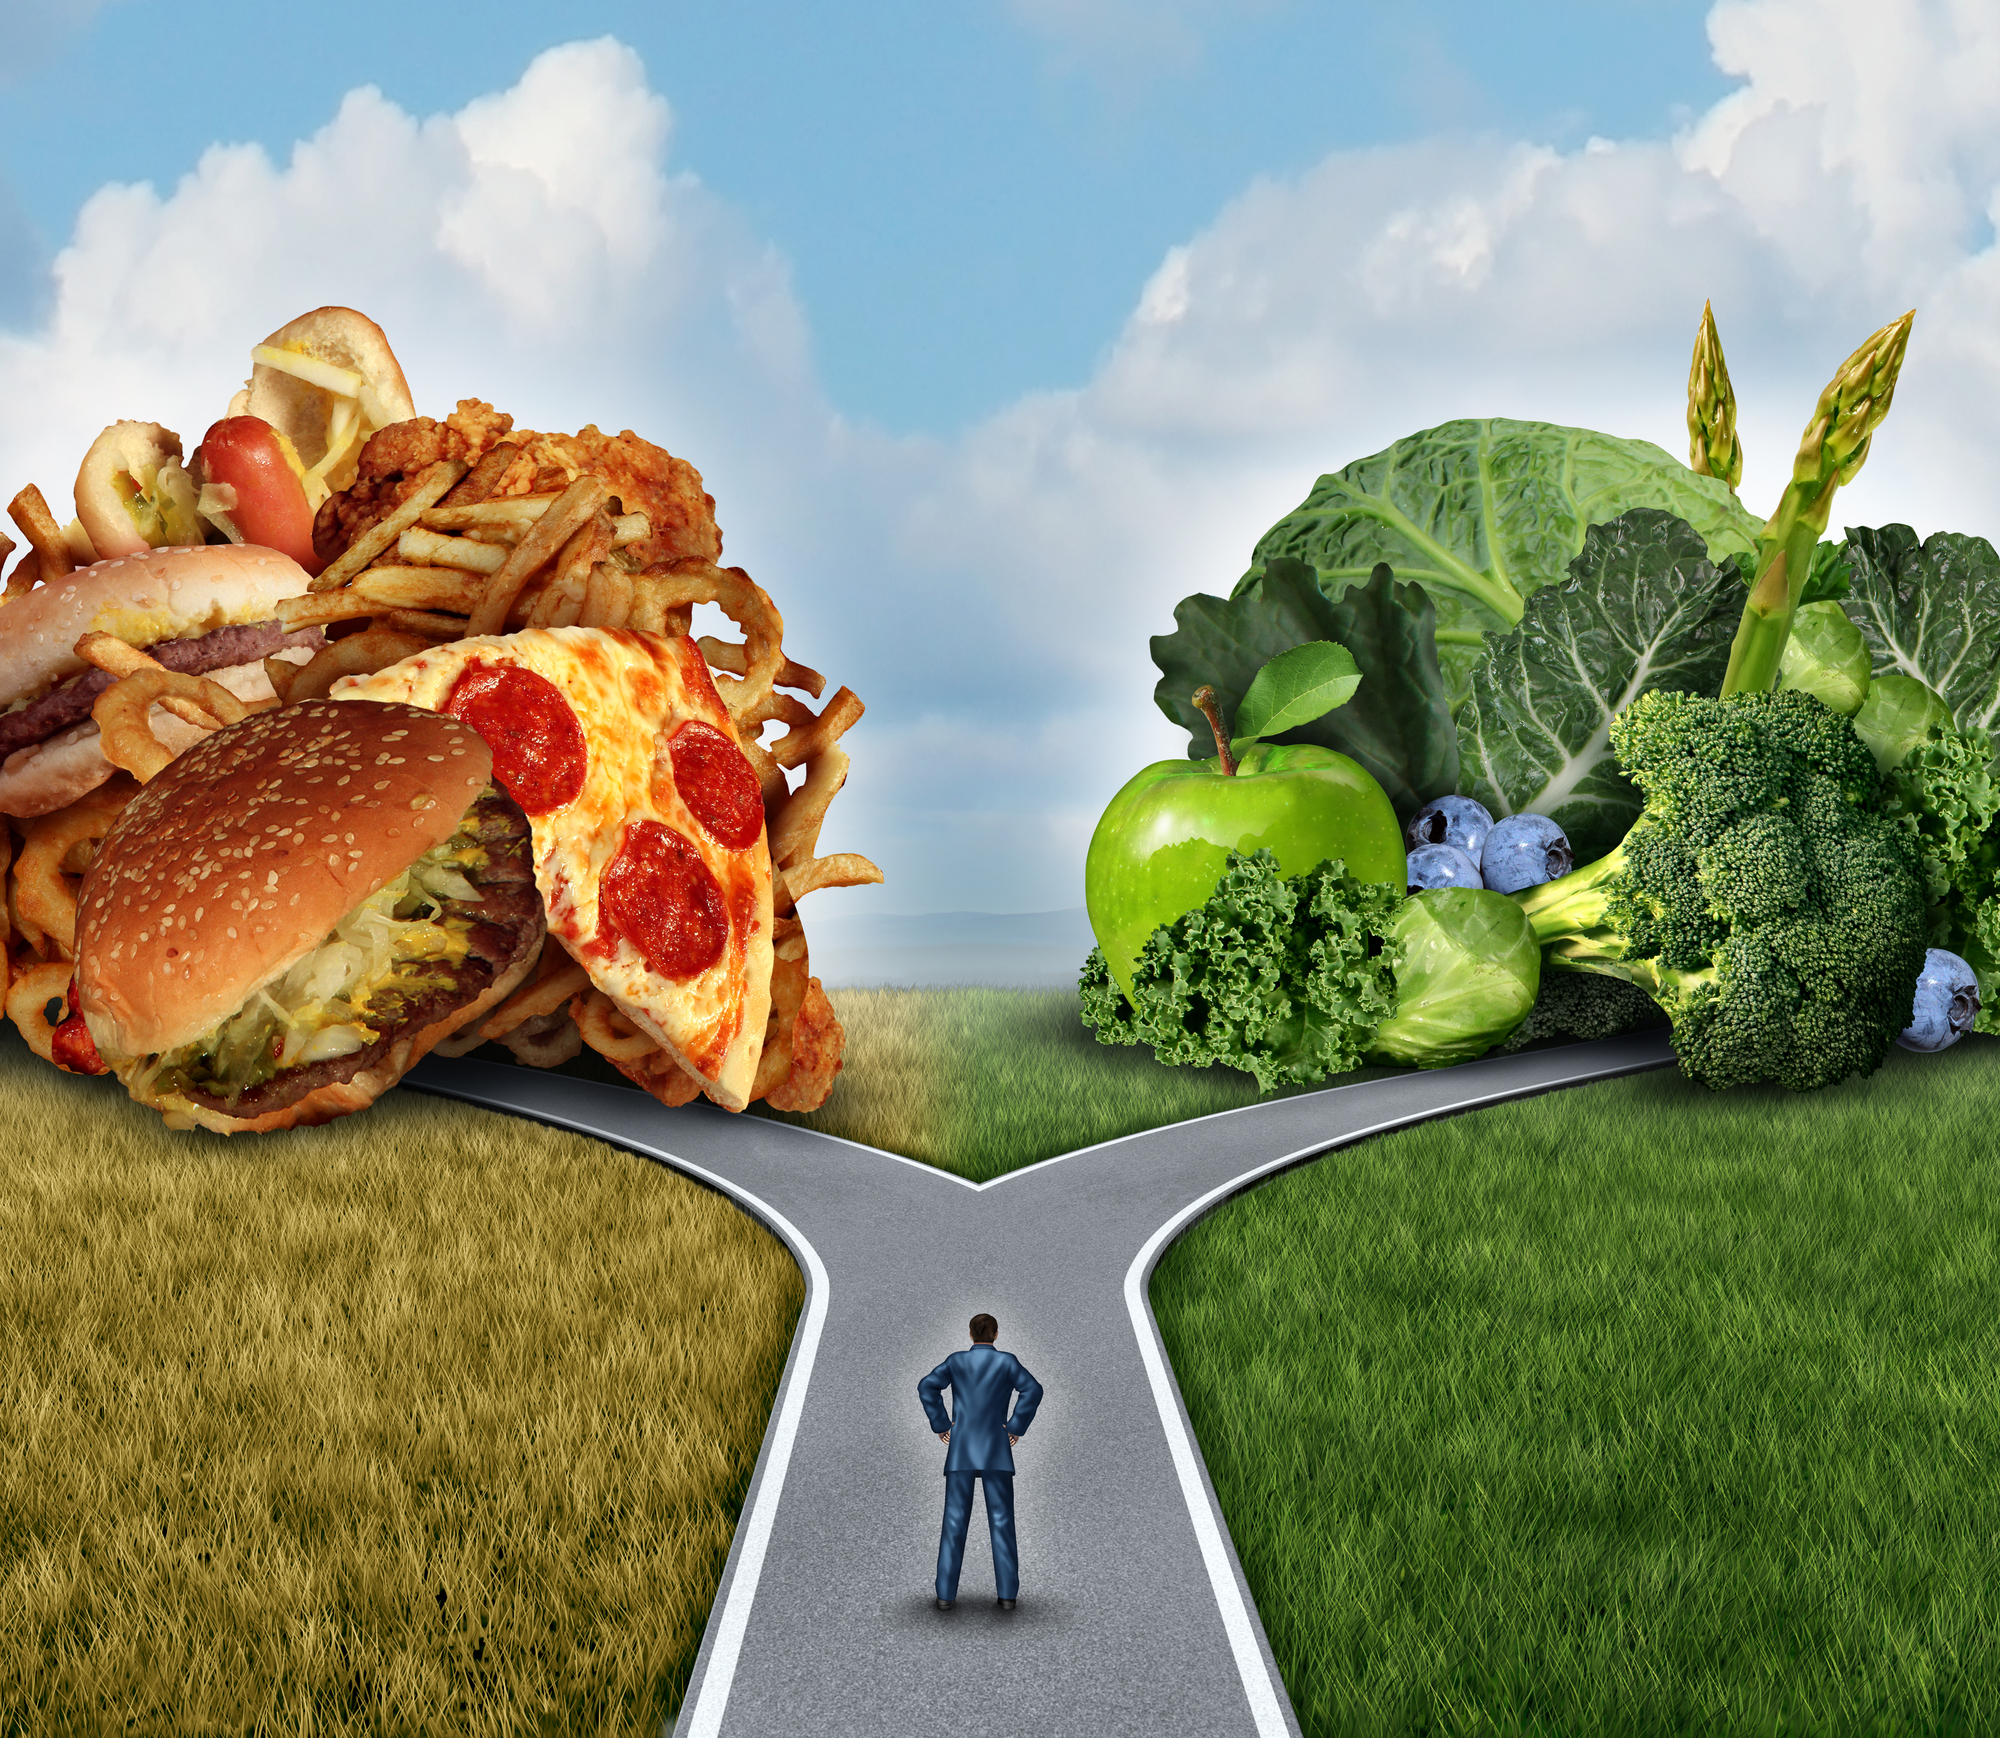 Self hypnosis for weight loss -a man in a suit standing at a crossroads of pizza and other junk food on the left and broccoli and other healthy food on the right